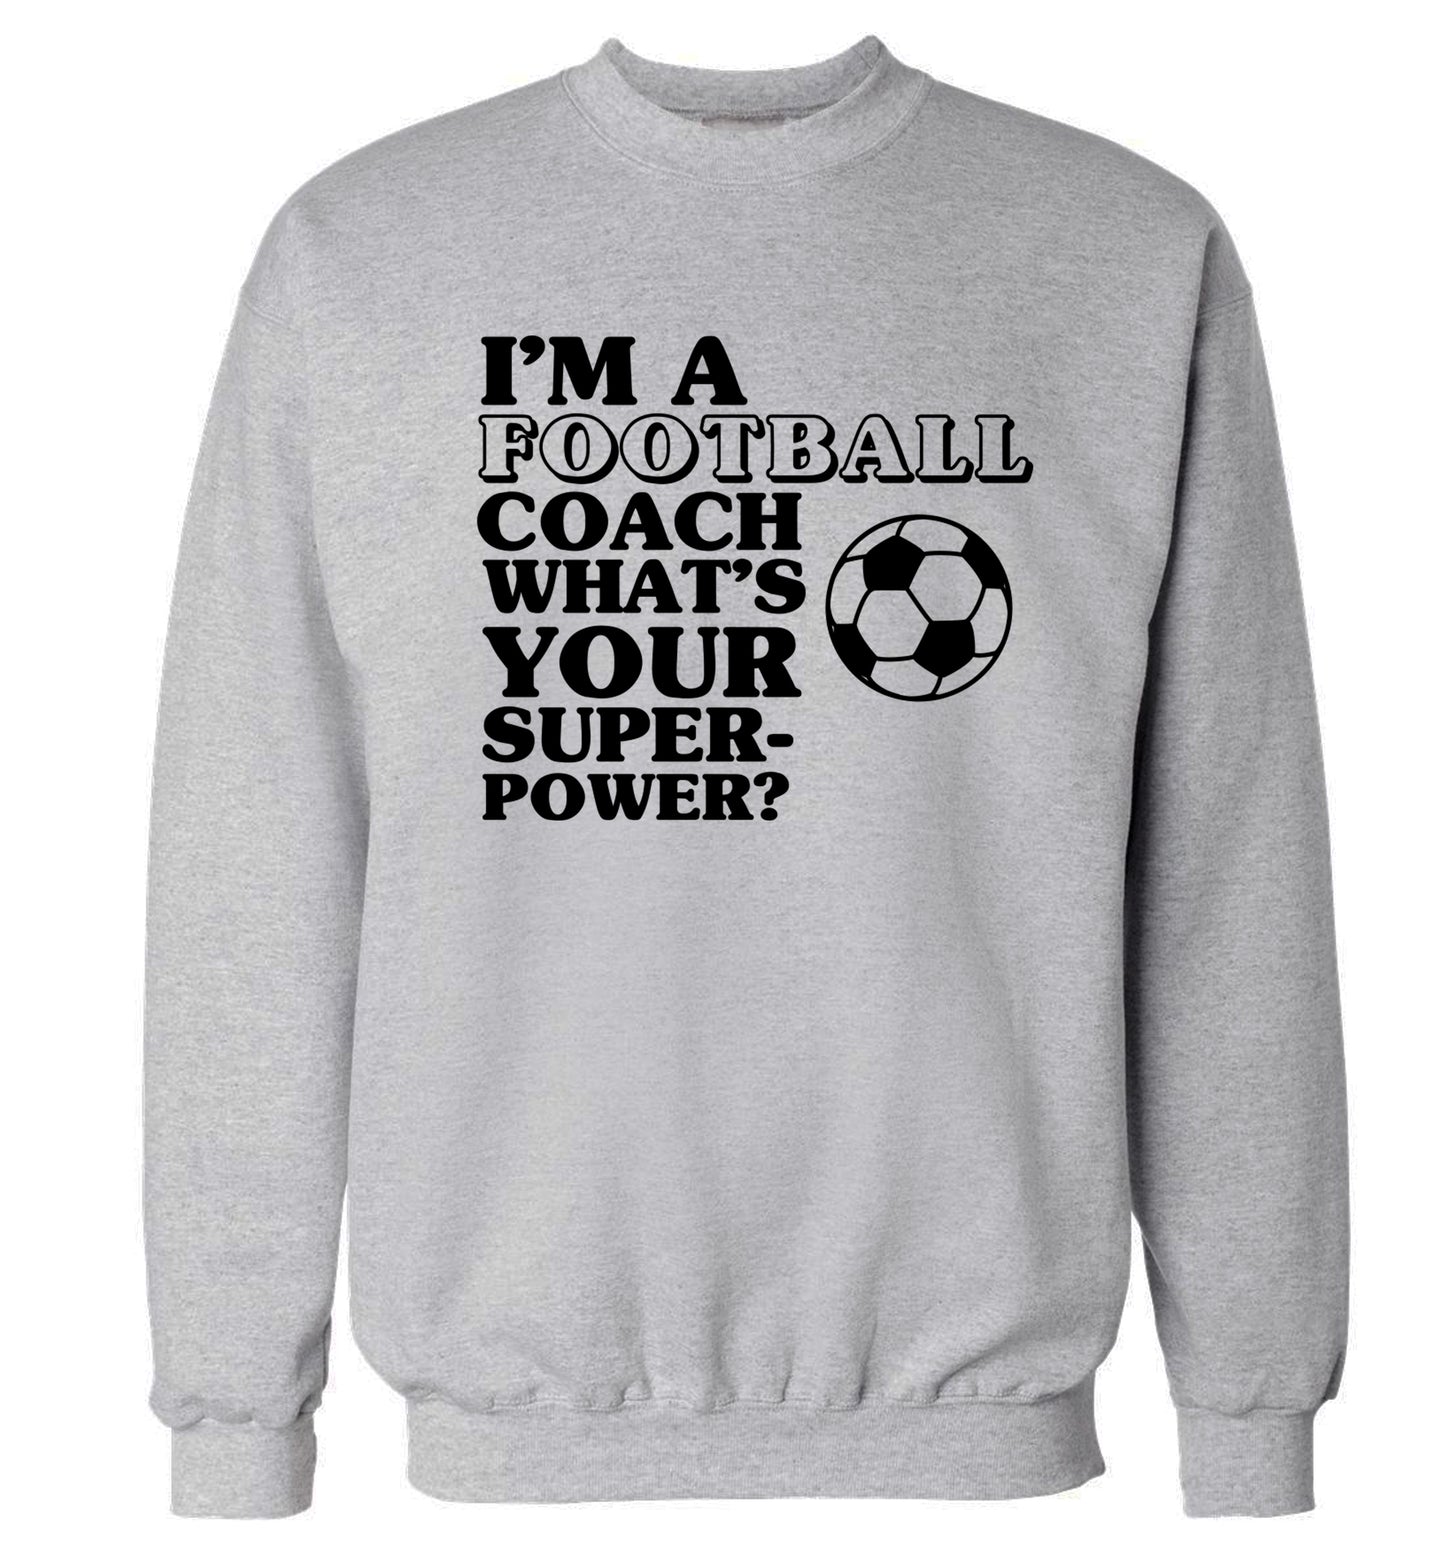 I'm a football coach what's your superpower? Adult's unisexgrey Sweater 2XL